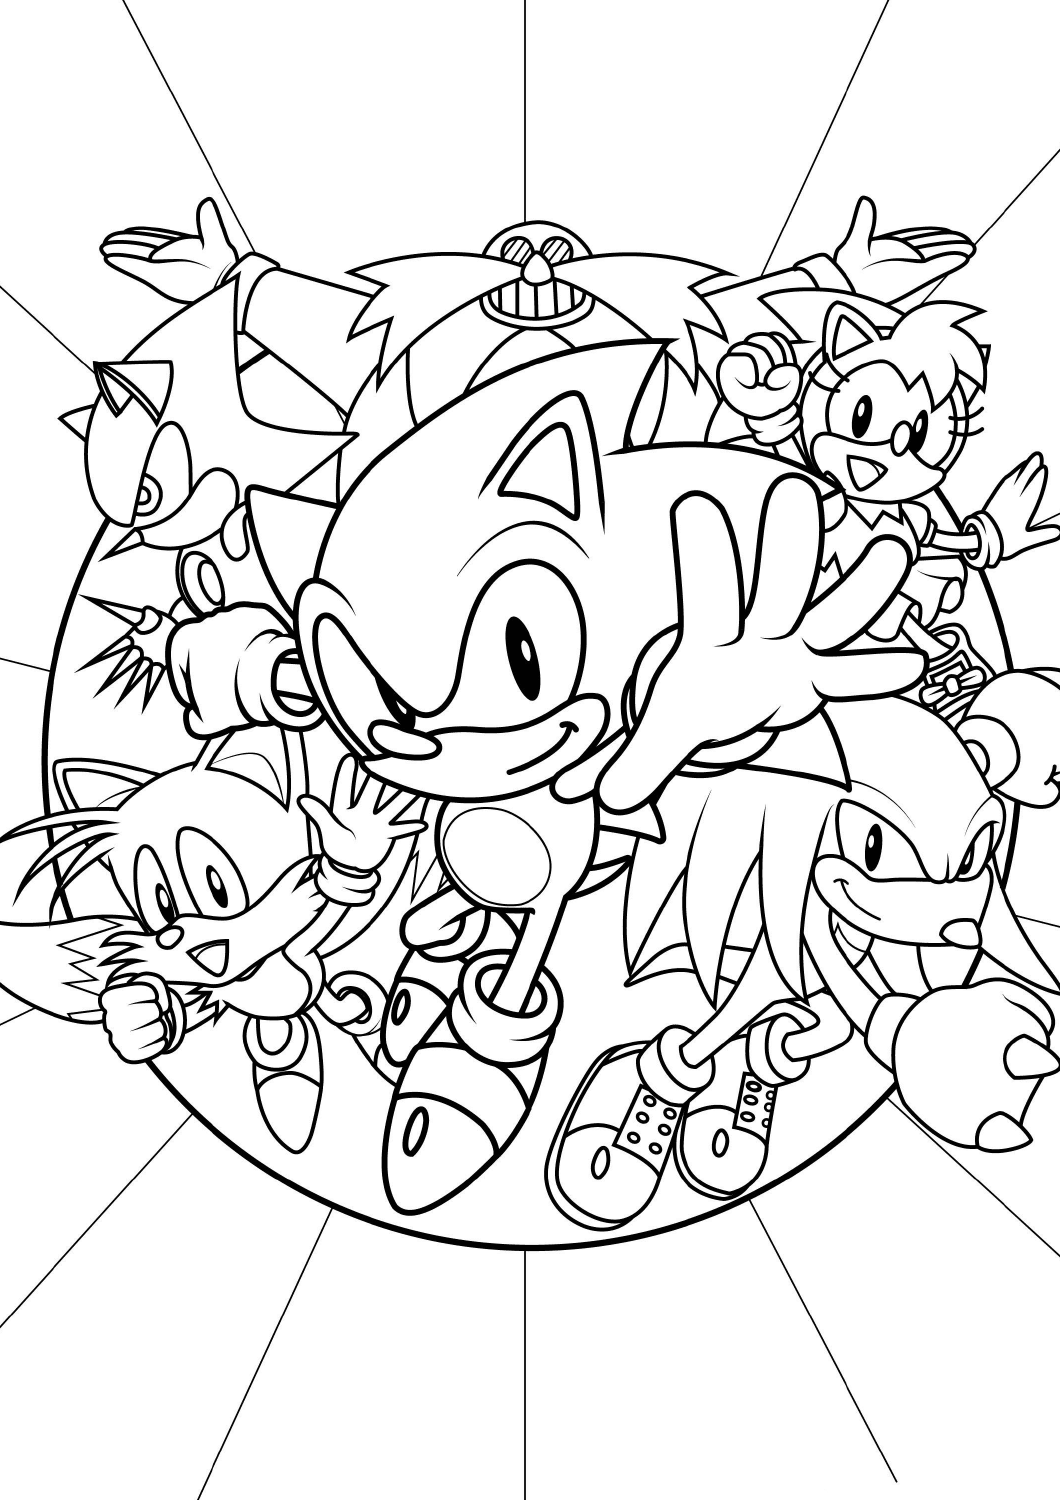 Sonic coloring pages and printables